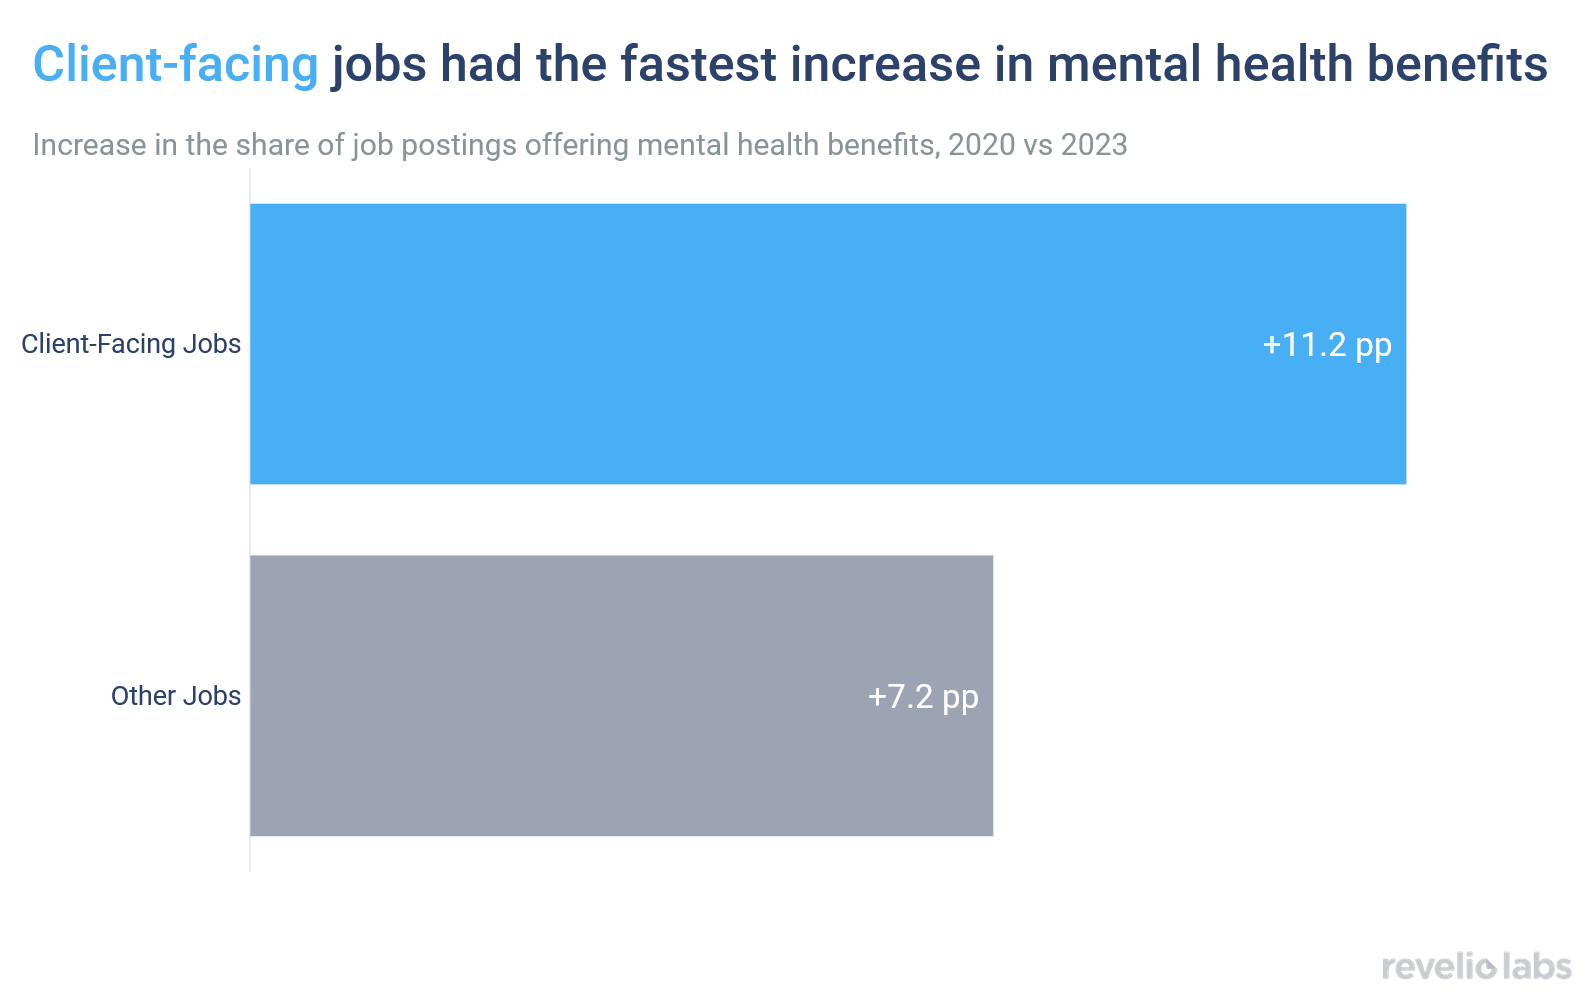 Client-facing jobs had the fastest increase in mental health benefits